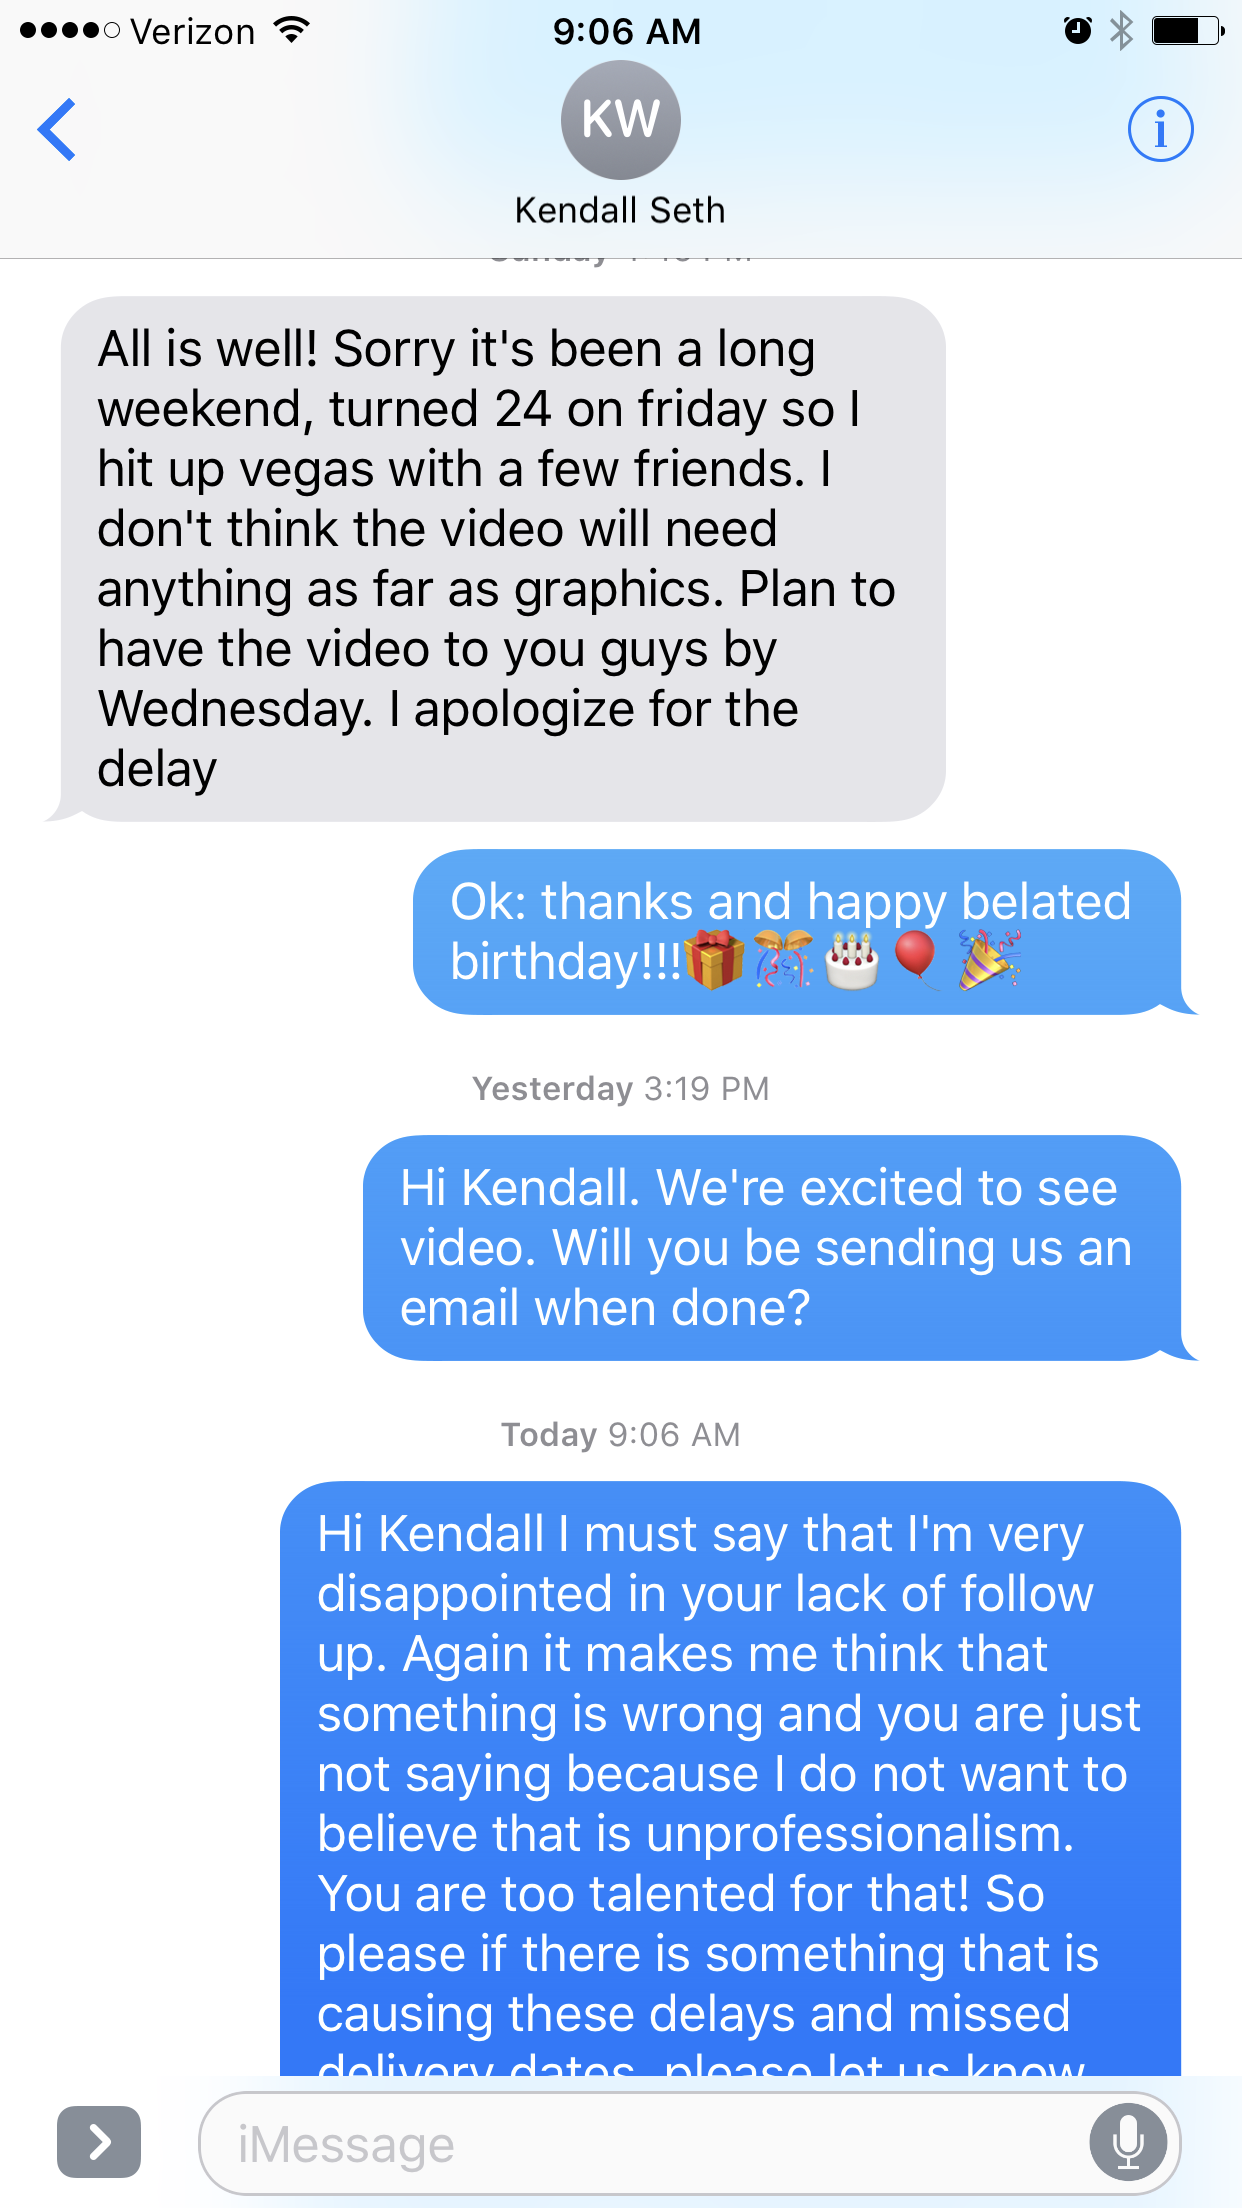 Text Contact After First Missed Delivery Date